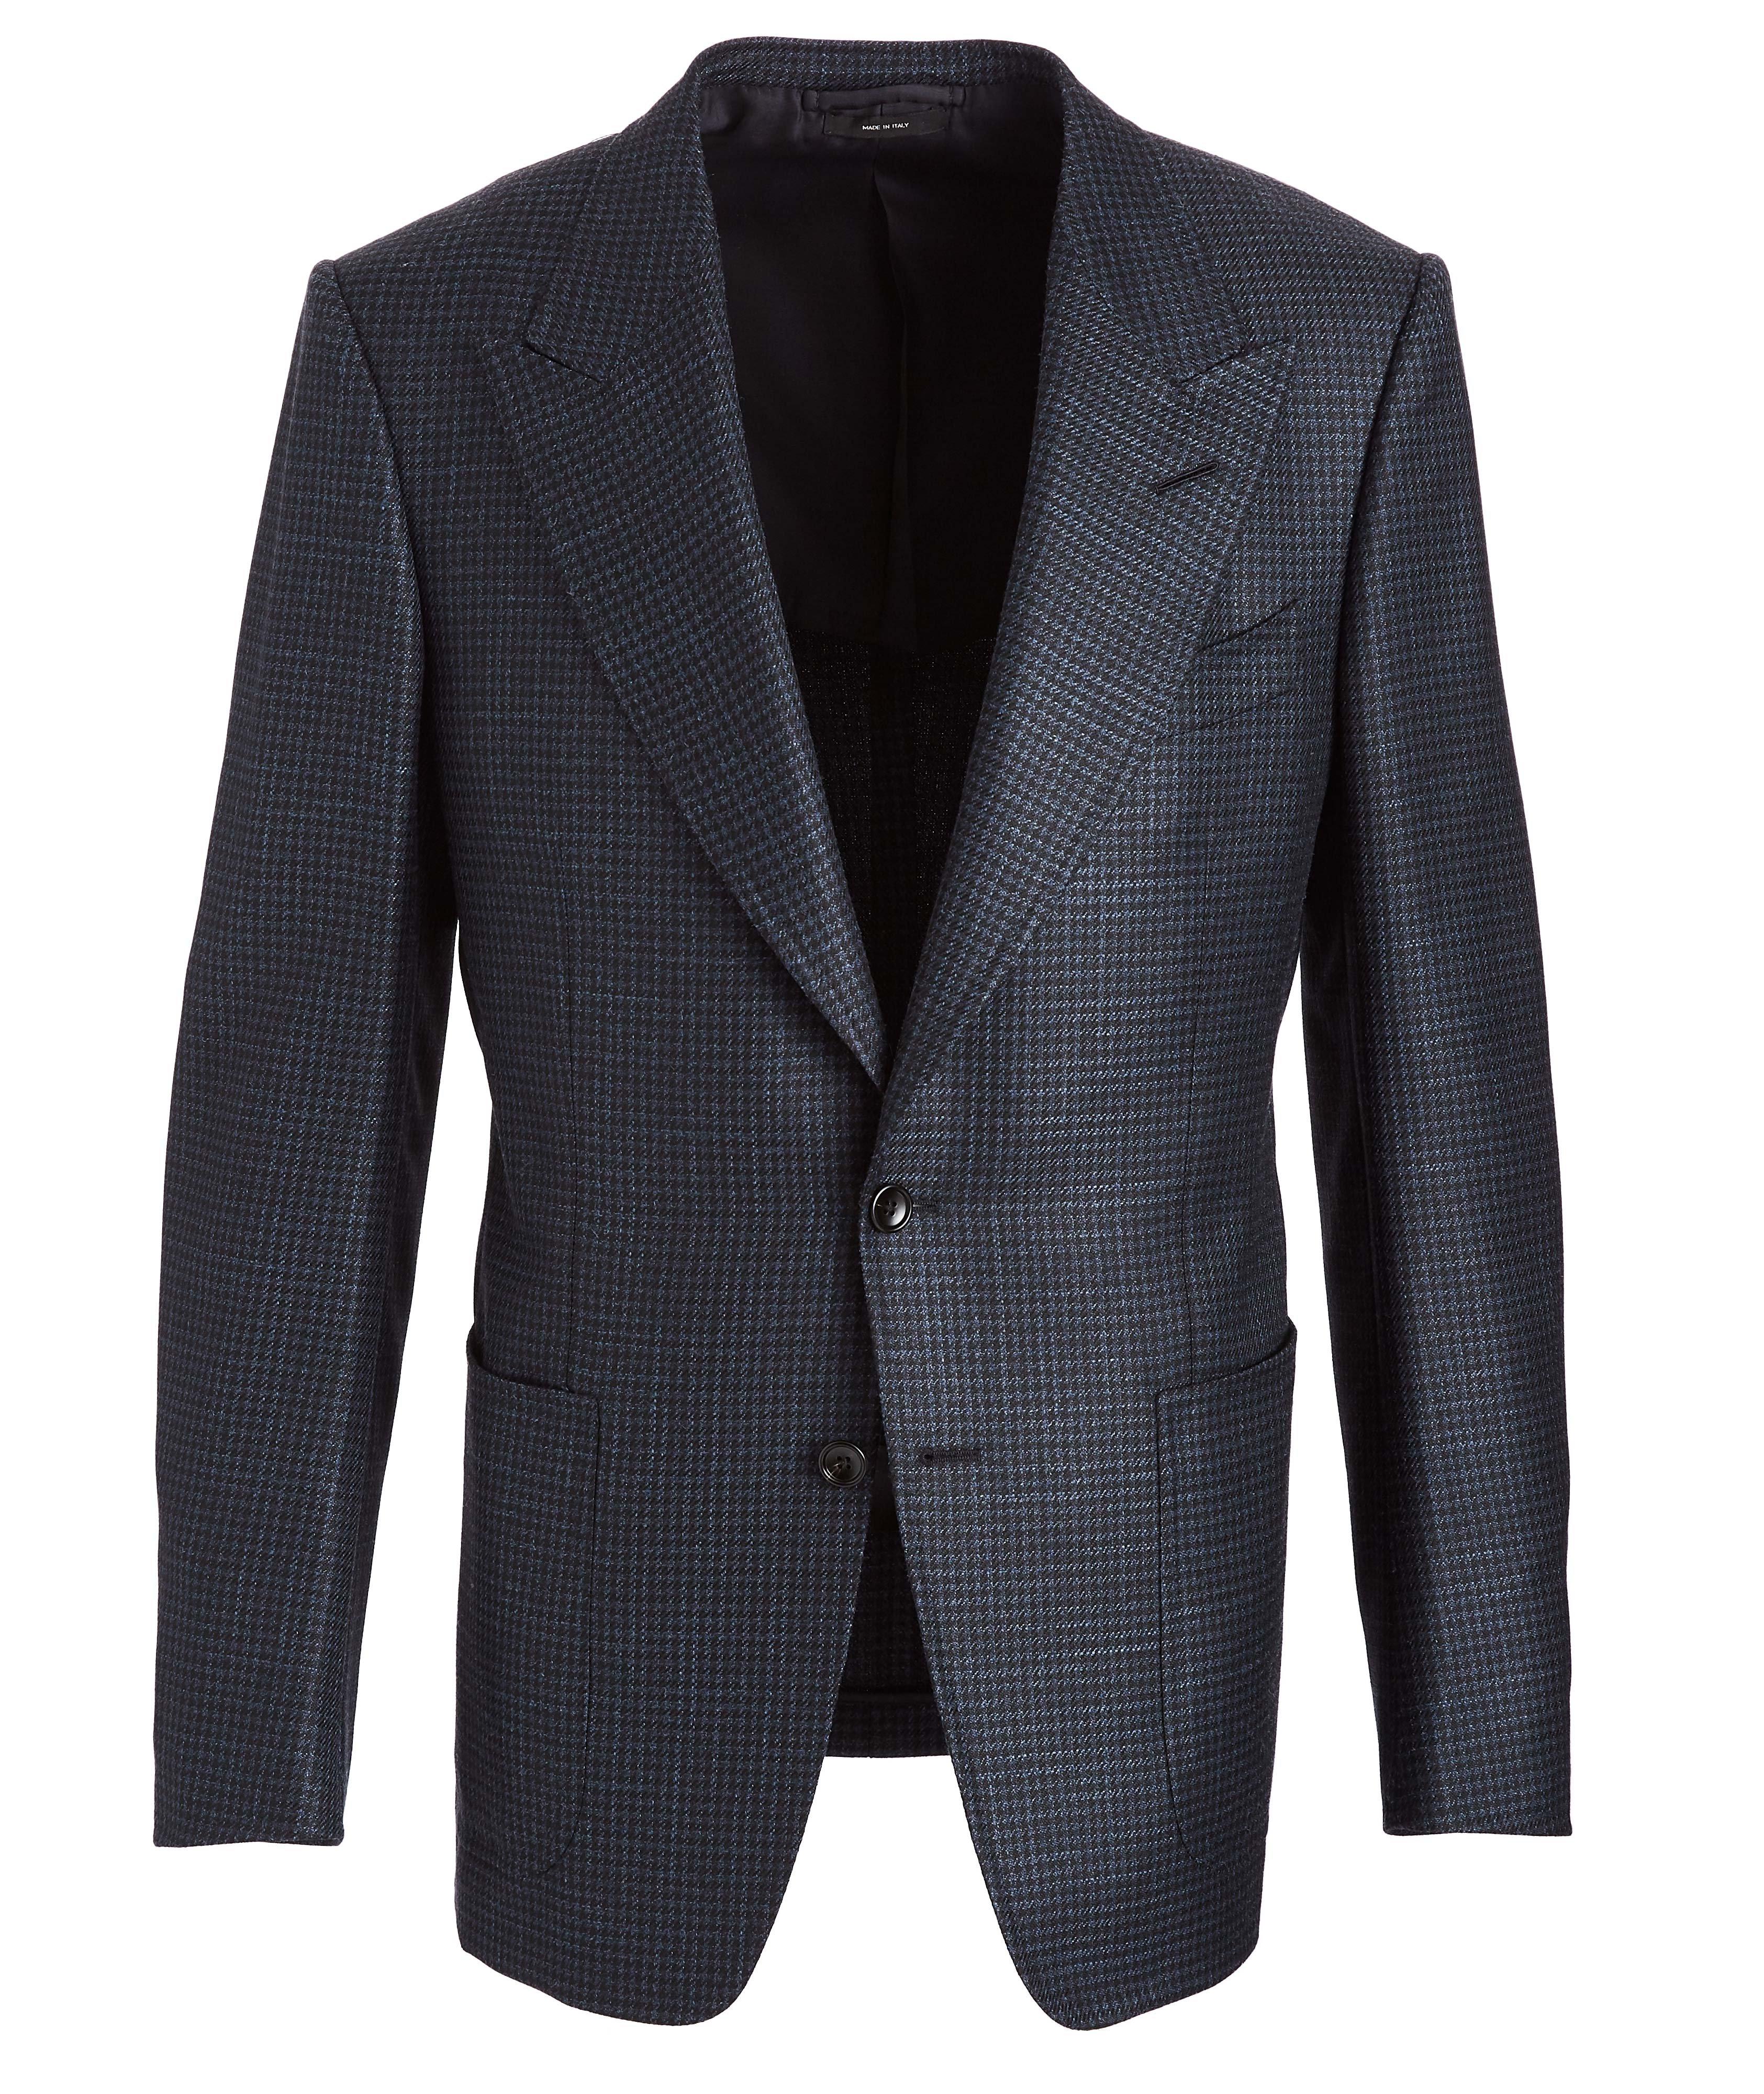 Shelton Wool, Mohair, and Silk Sports Jacket image 0